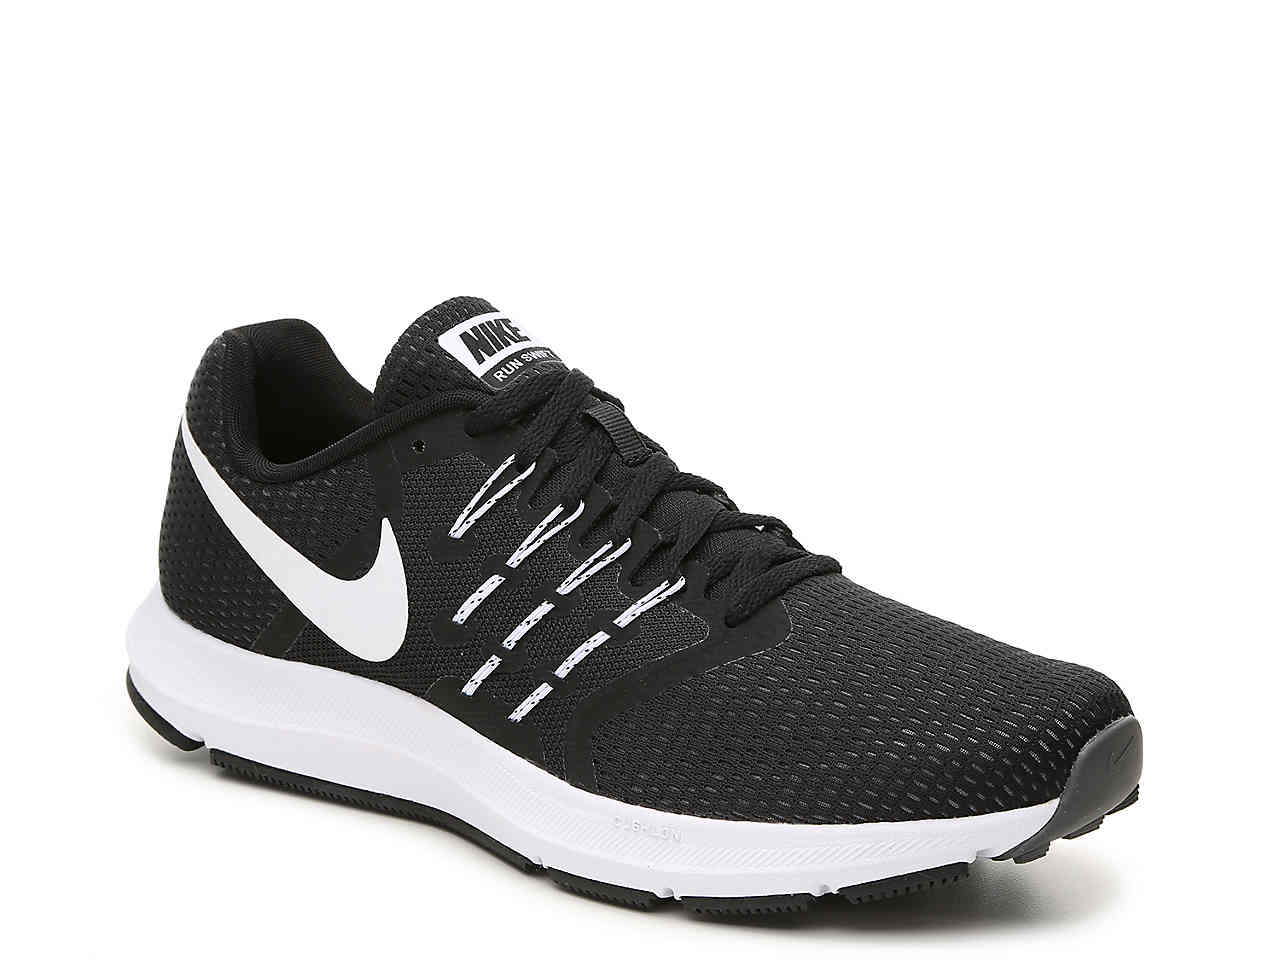 Black Running Shoes – Choose the Most Comfortable One!